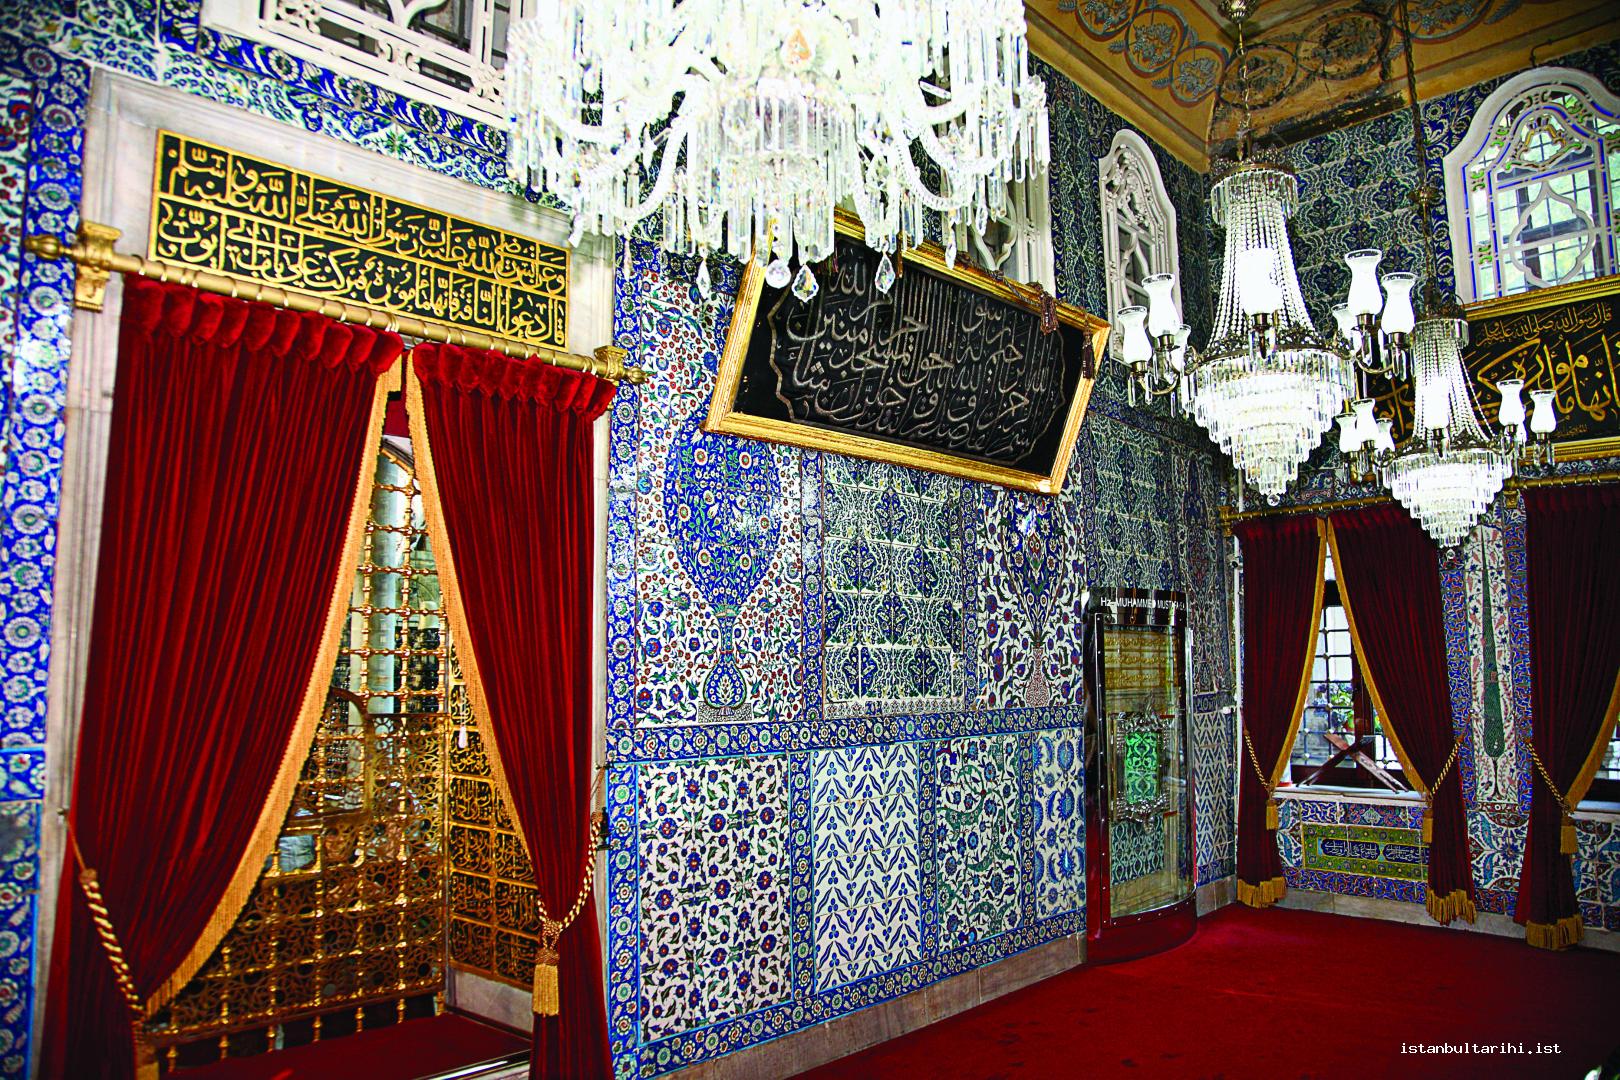 21- The inner view of the tomb of Abu Ayyub al-Ansari